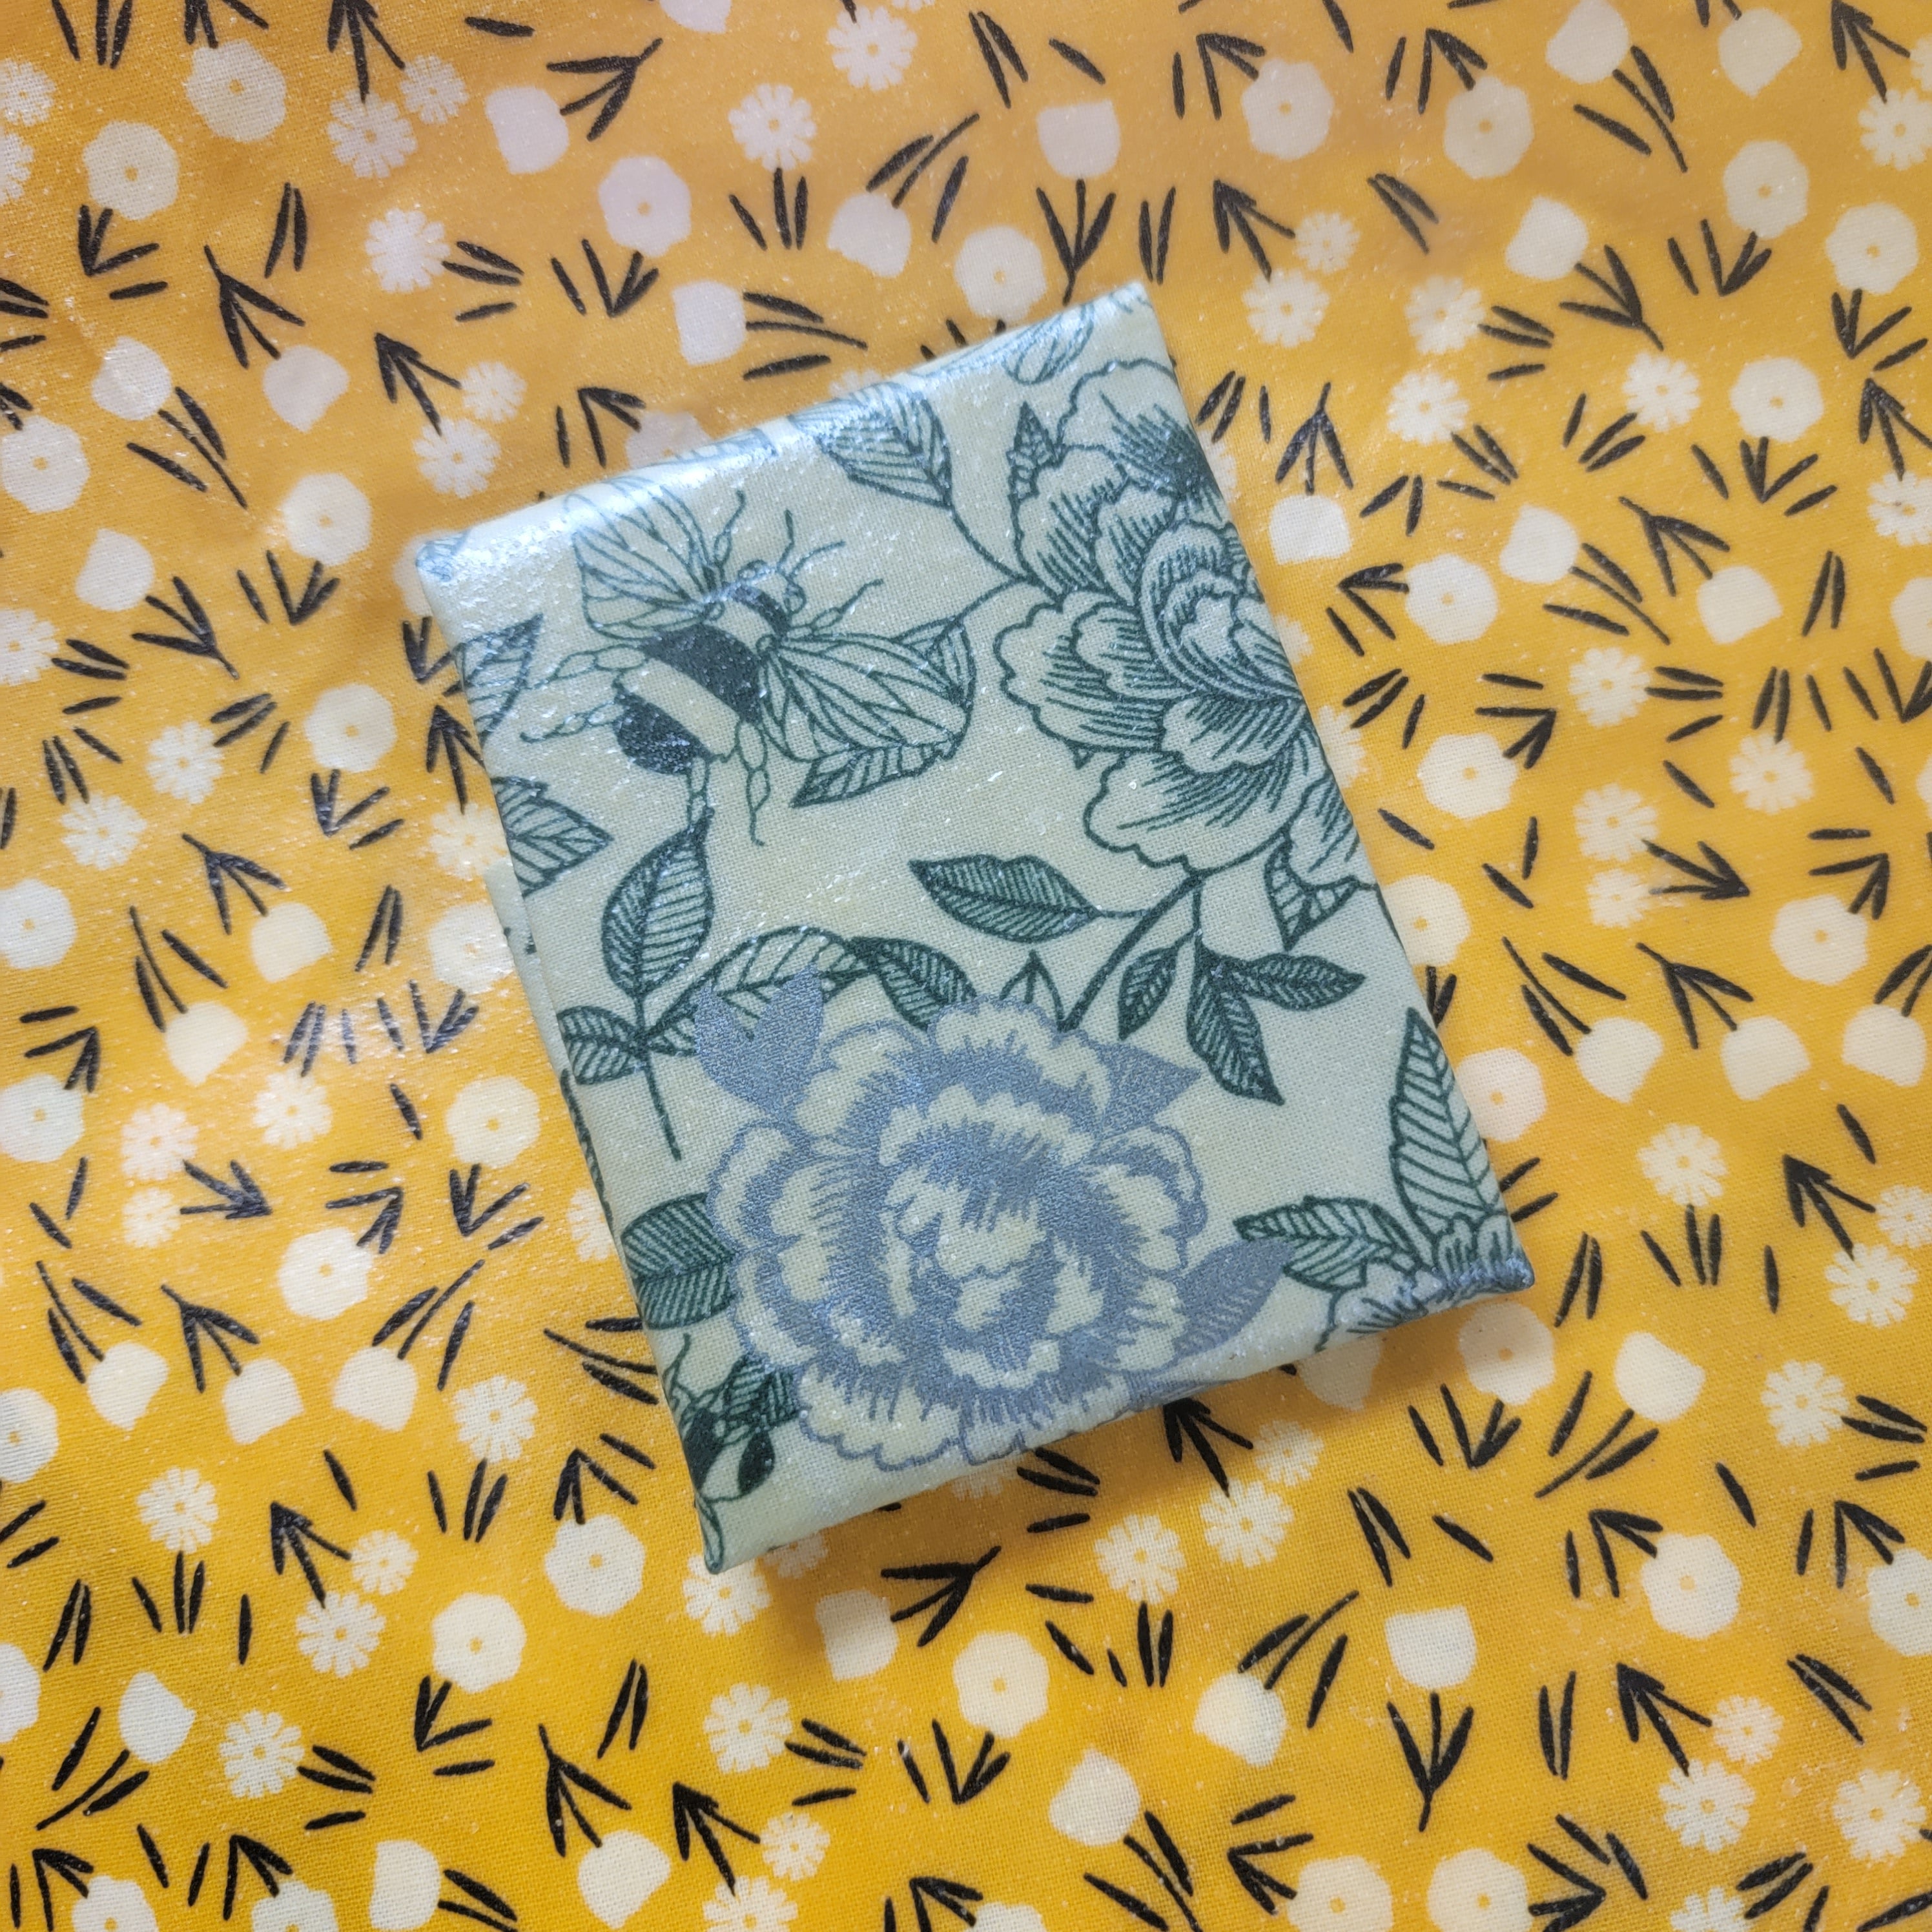 Beeswax Wrap - 3 Pack - Multicolored Fabric — Bee Hill Farm